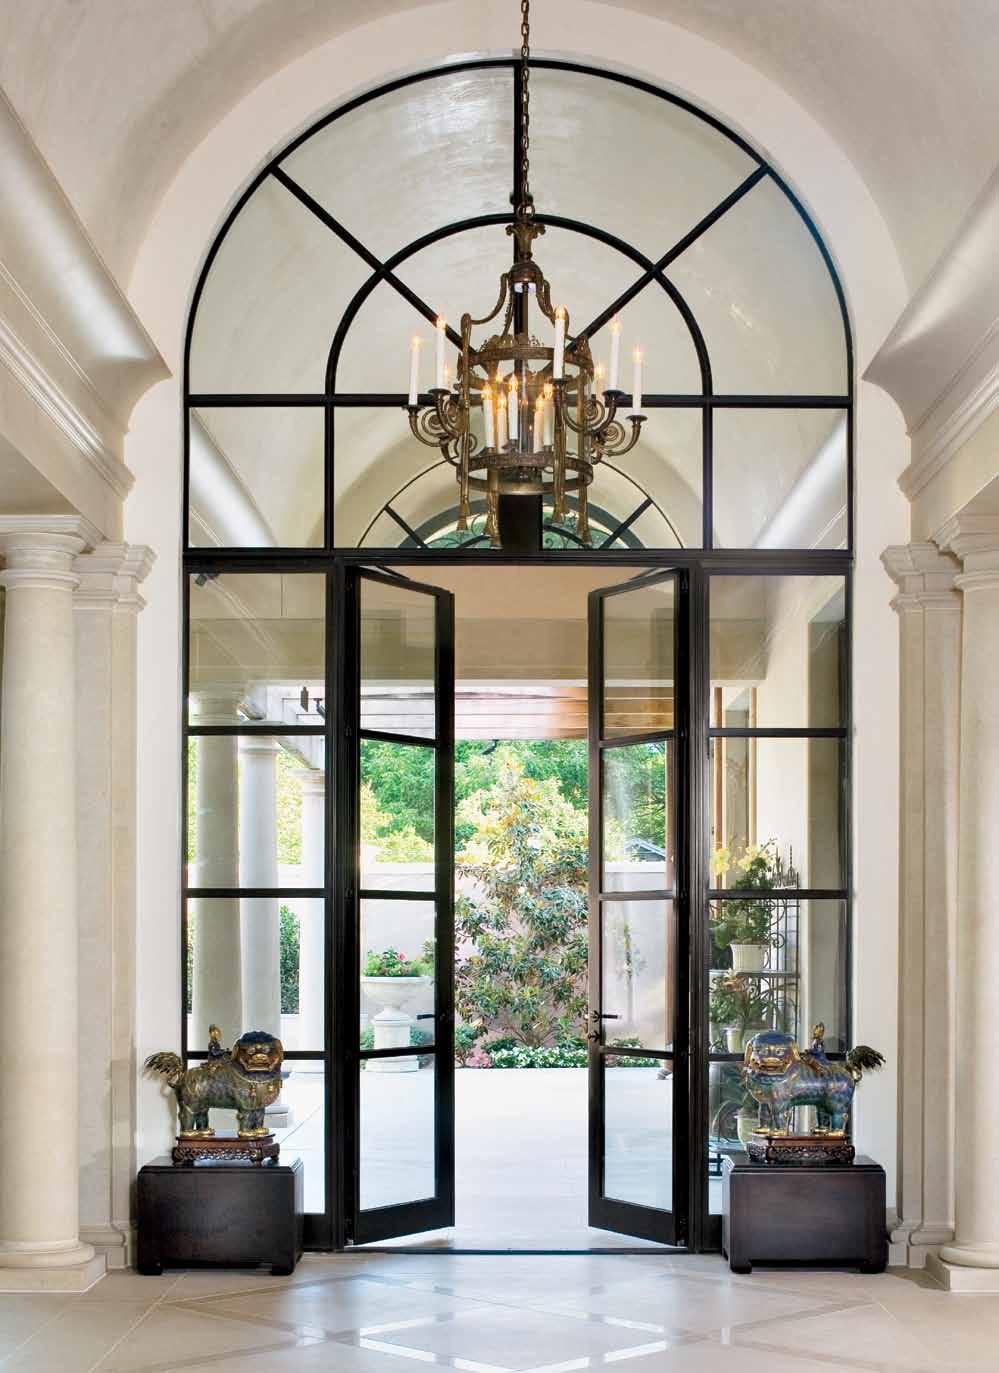 Custom steel-framed Hope s windows and doors alongside a barrel-vaulted ceiling, 10-foot-high Doric columns and Lueders limestone flooring laid in a diamond pattern contribute to this